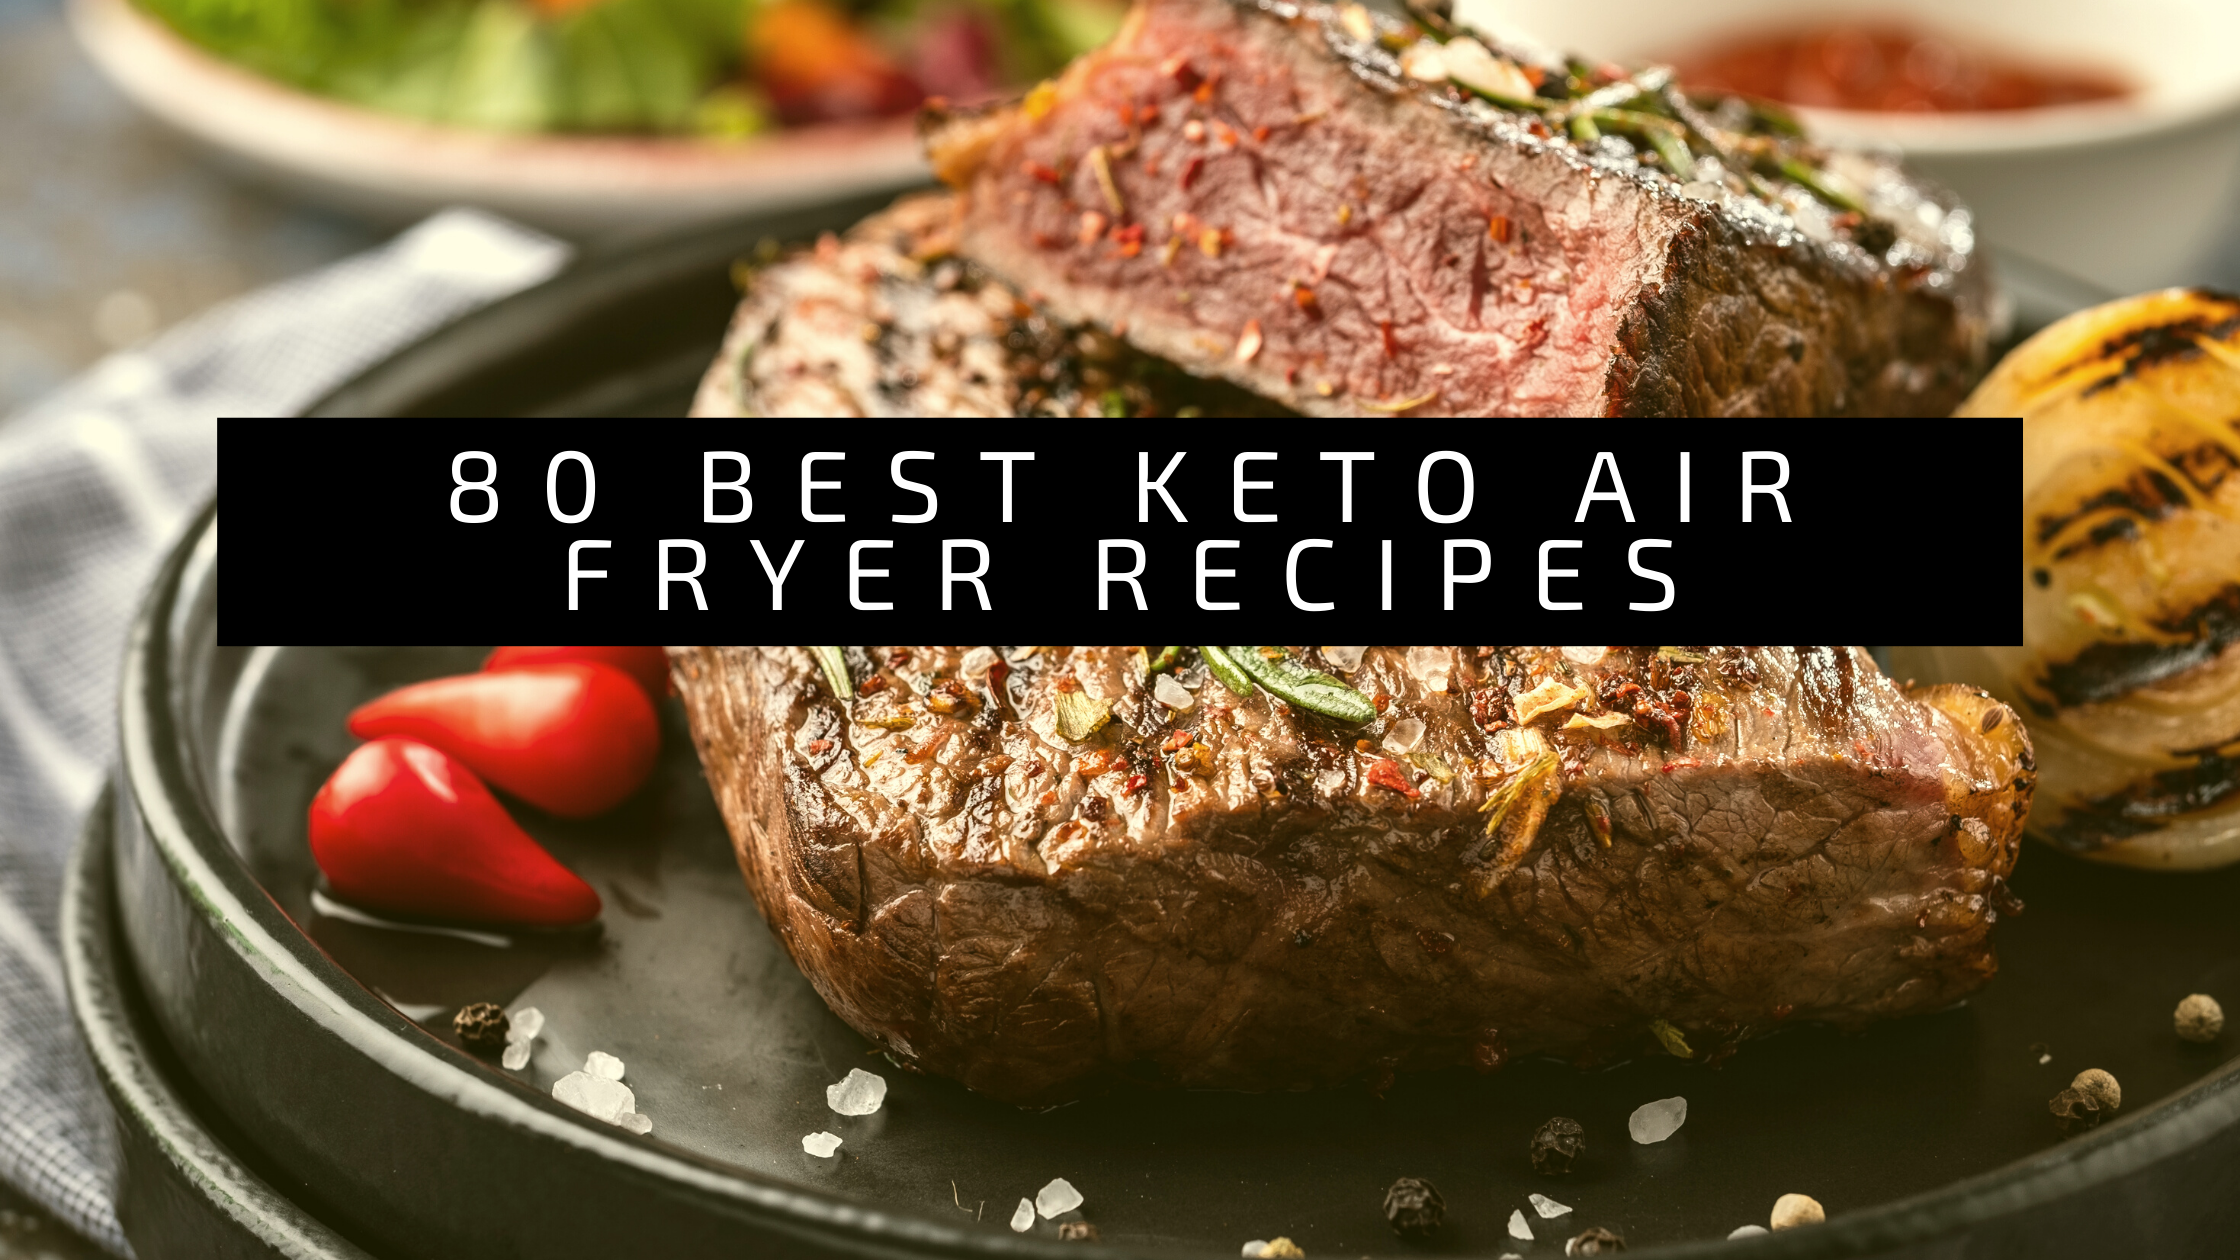 40 Family-Friendly Keto Air Fryer Recipes for Quick and Delicious Meals 18